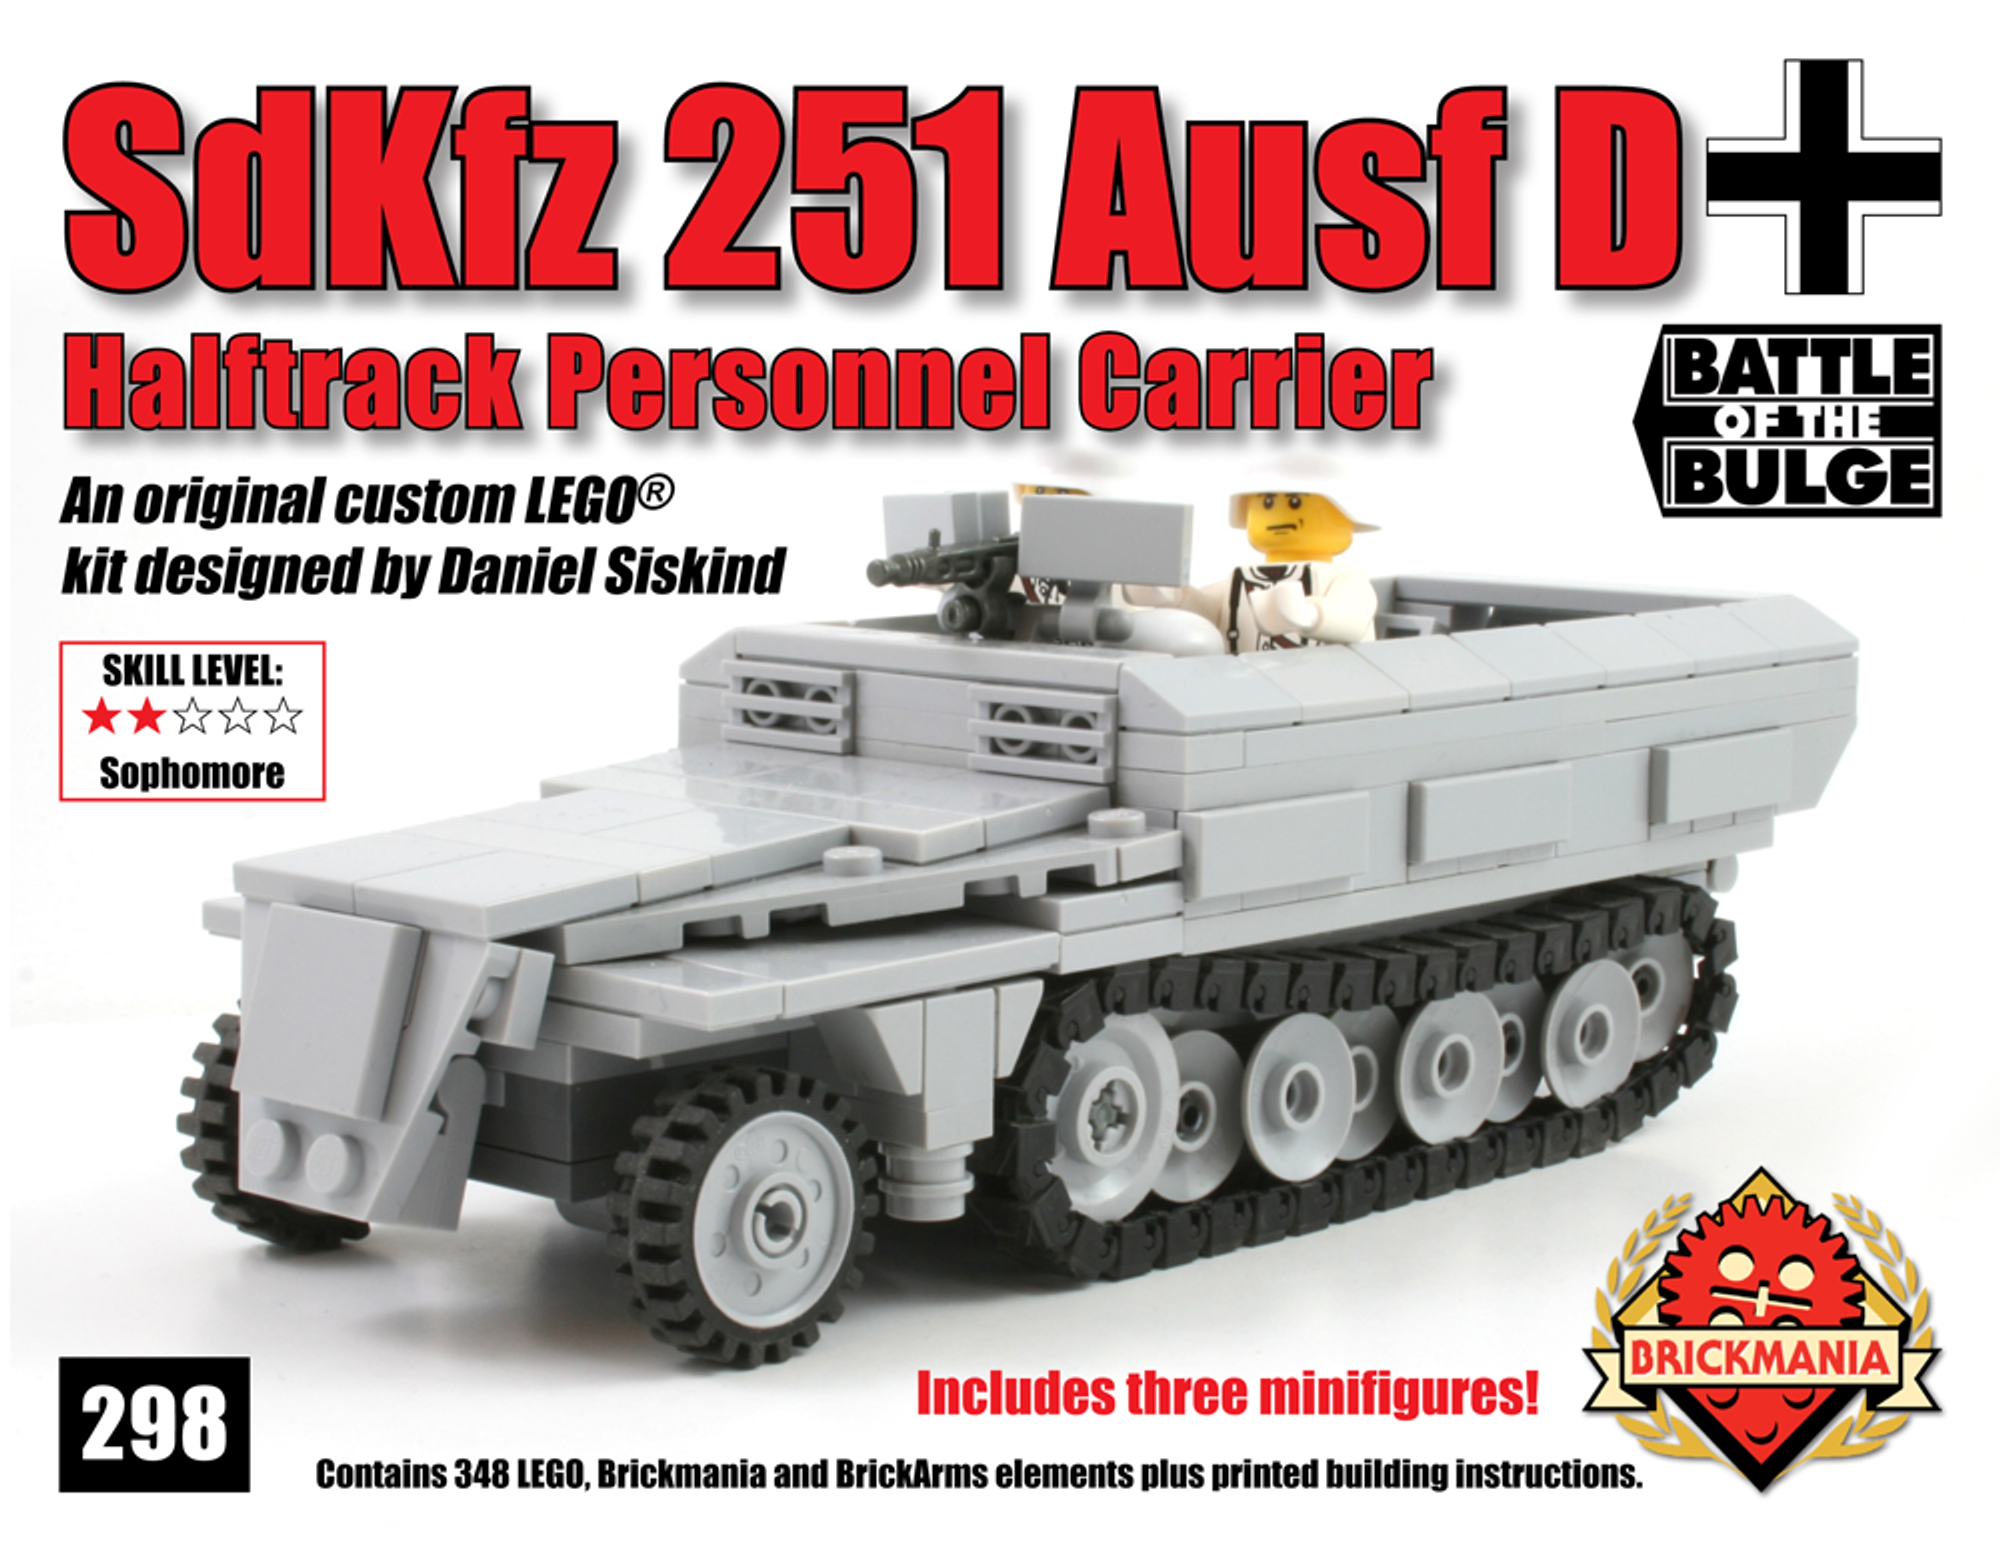 SdKfz 251 Ausf D Halftrack Personnel Carrier